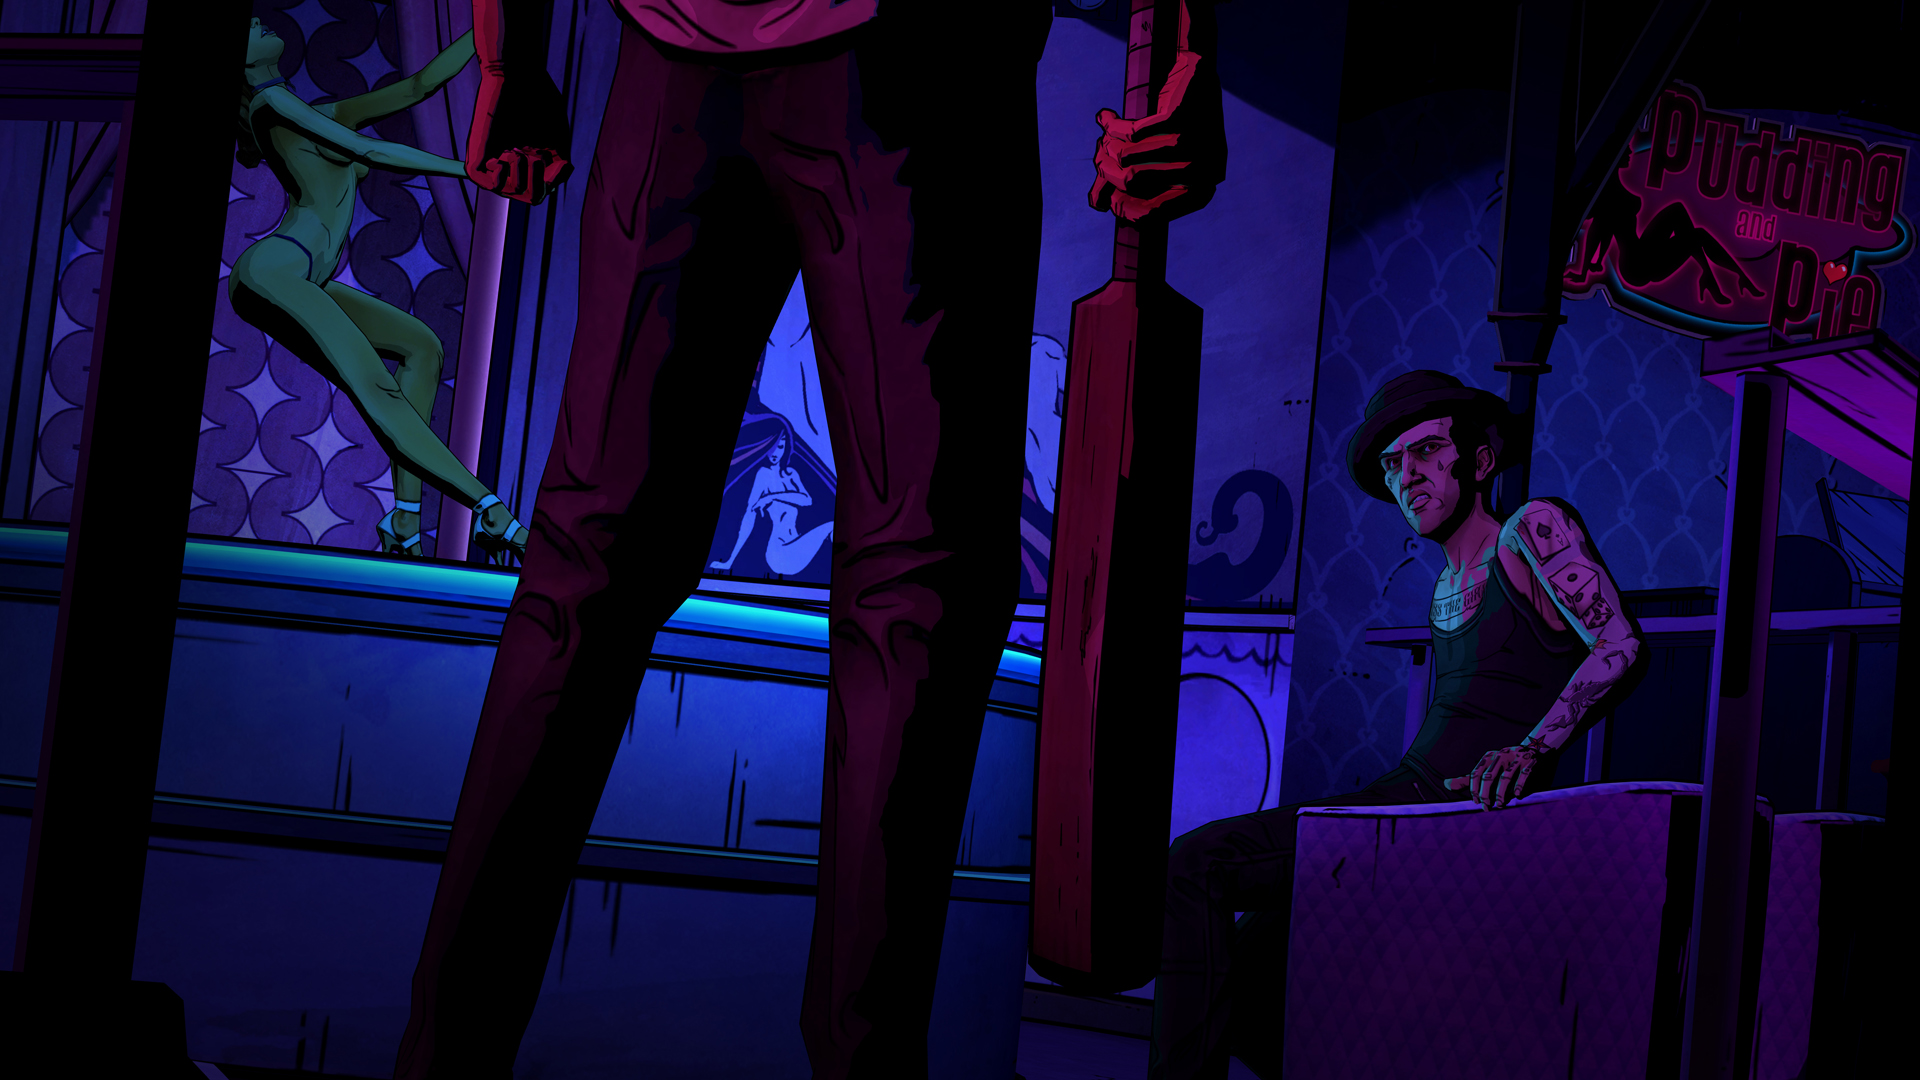 The Wolf Among Us On Steam